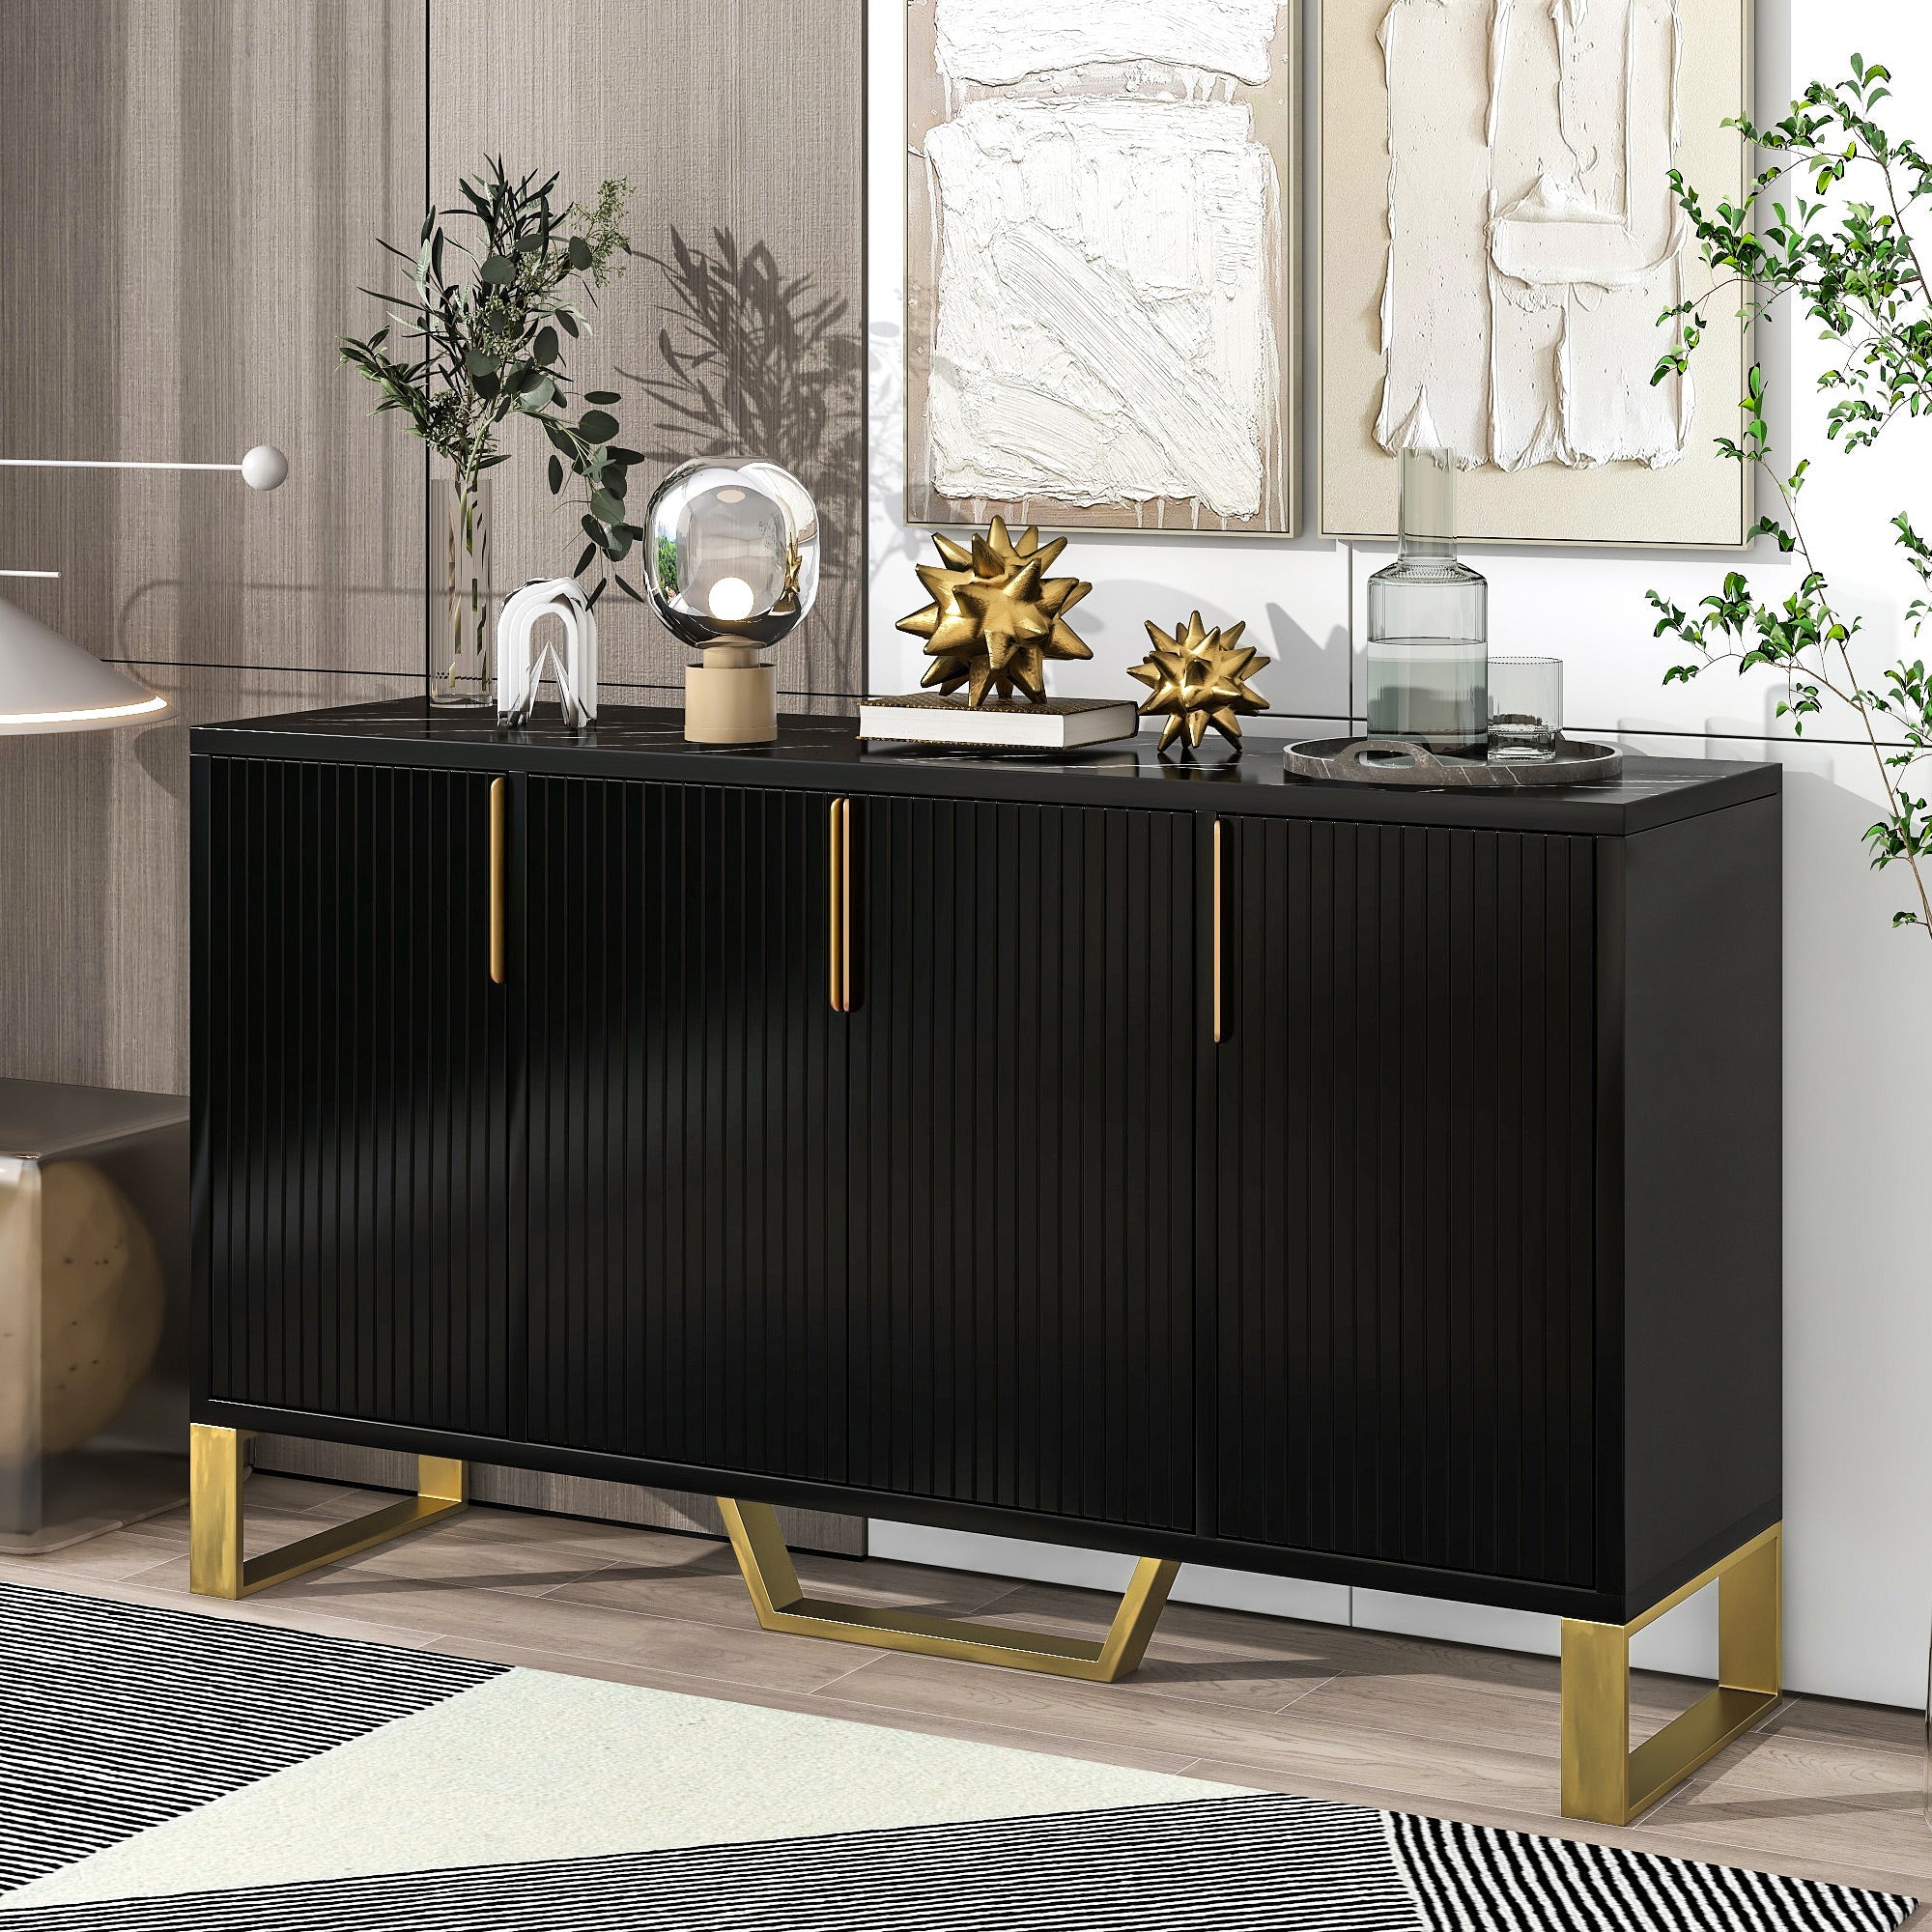 Jack-Kitchen-Sideboard-with-Four-Doors,-Metal-handles-and-Legs-and-Adjustable-Shelves-Kitchen-Buffets/Sideboards